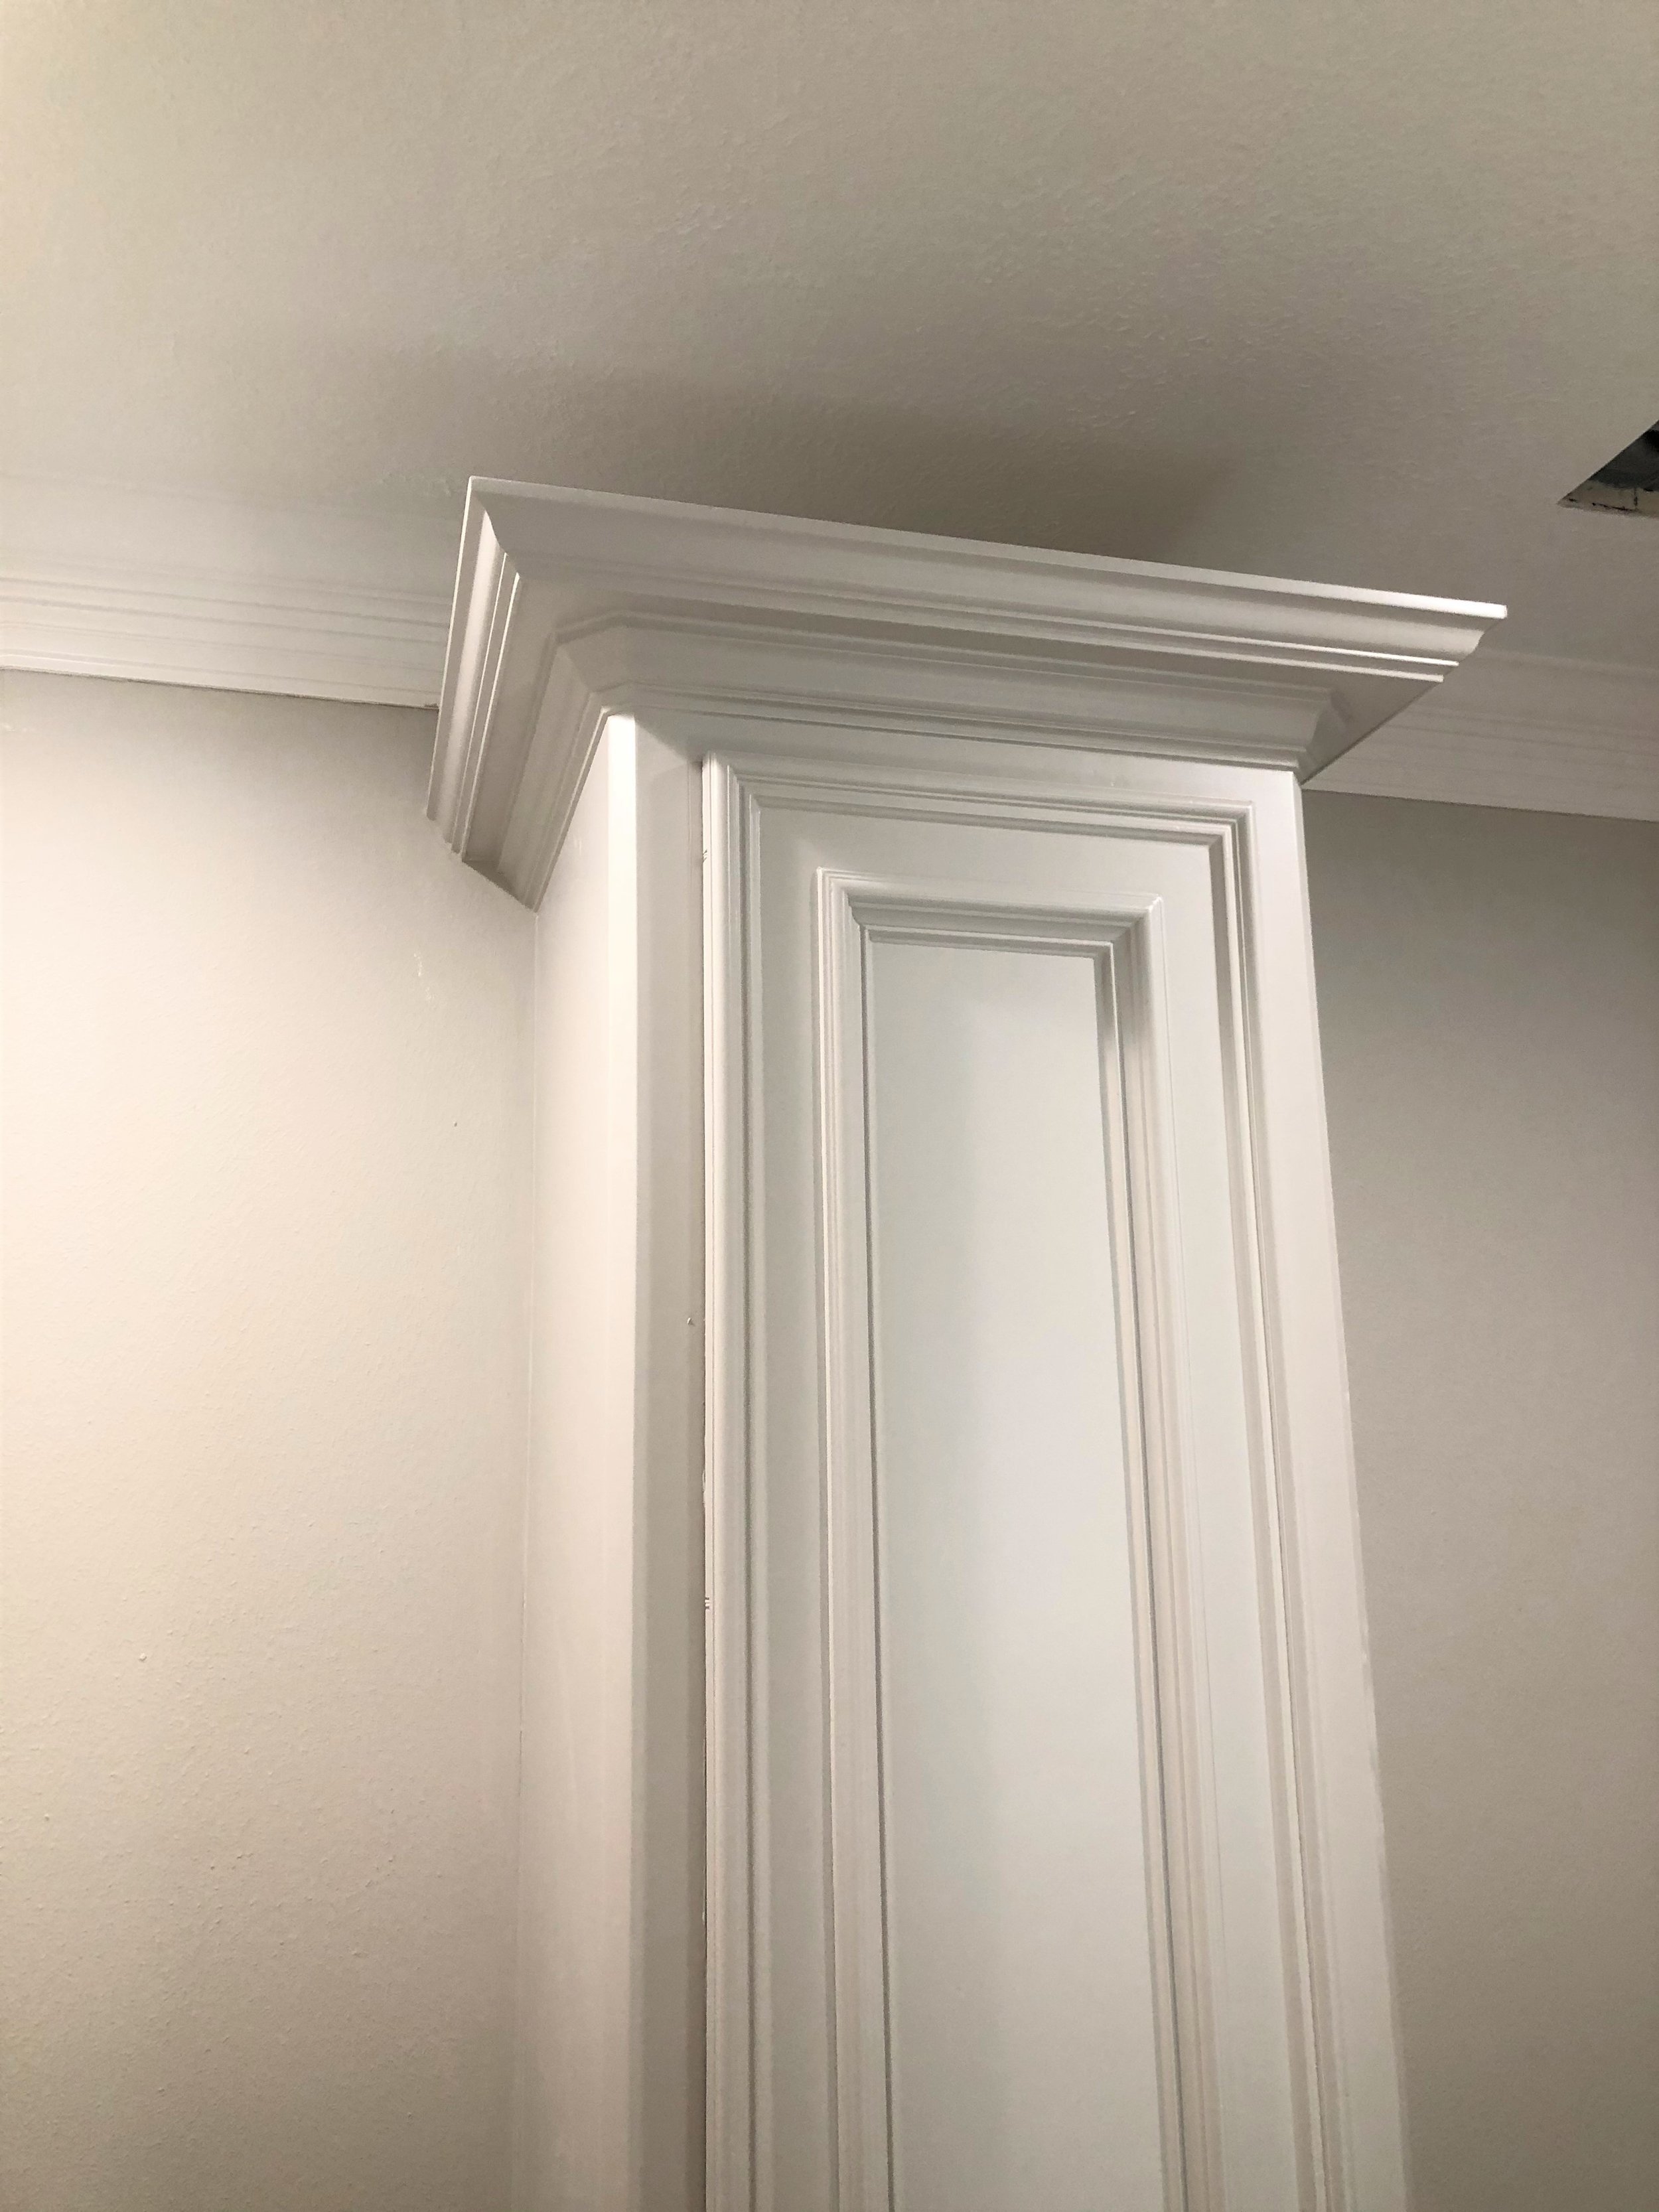 Mouldings Can Be A Beautiful Thing